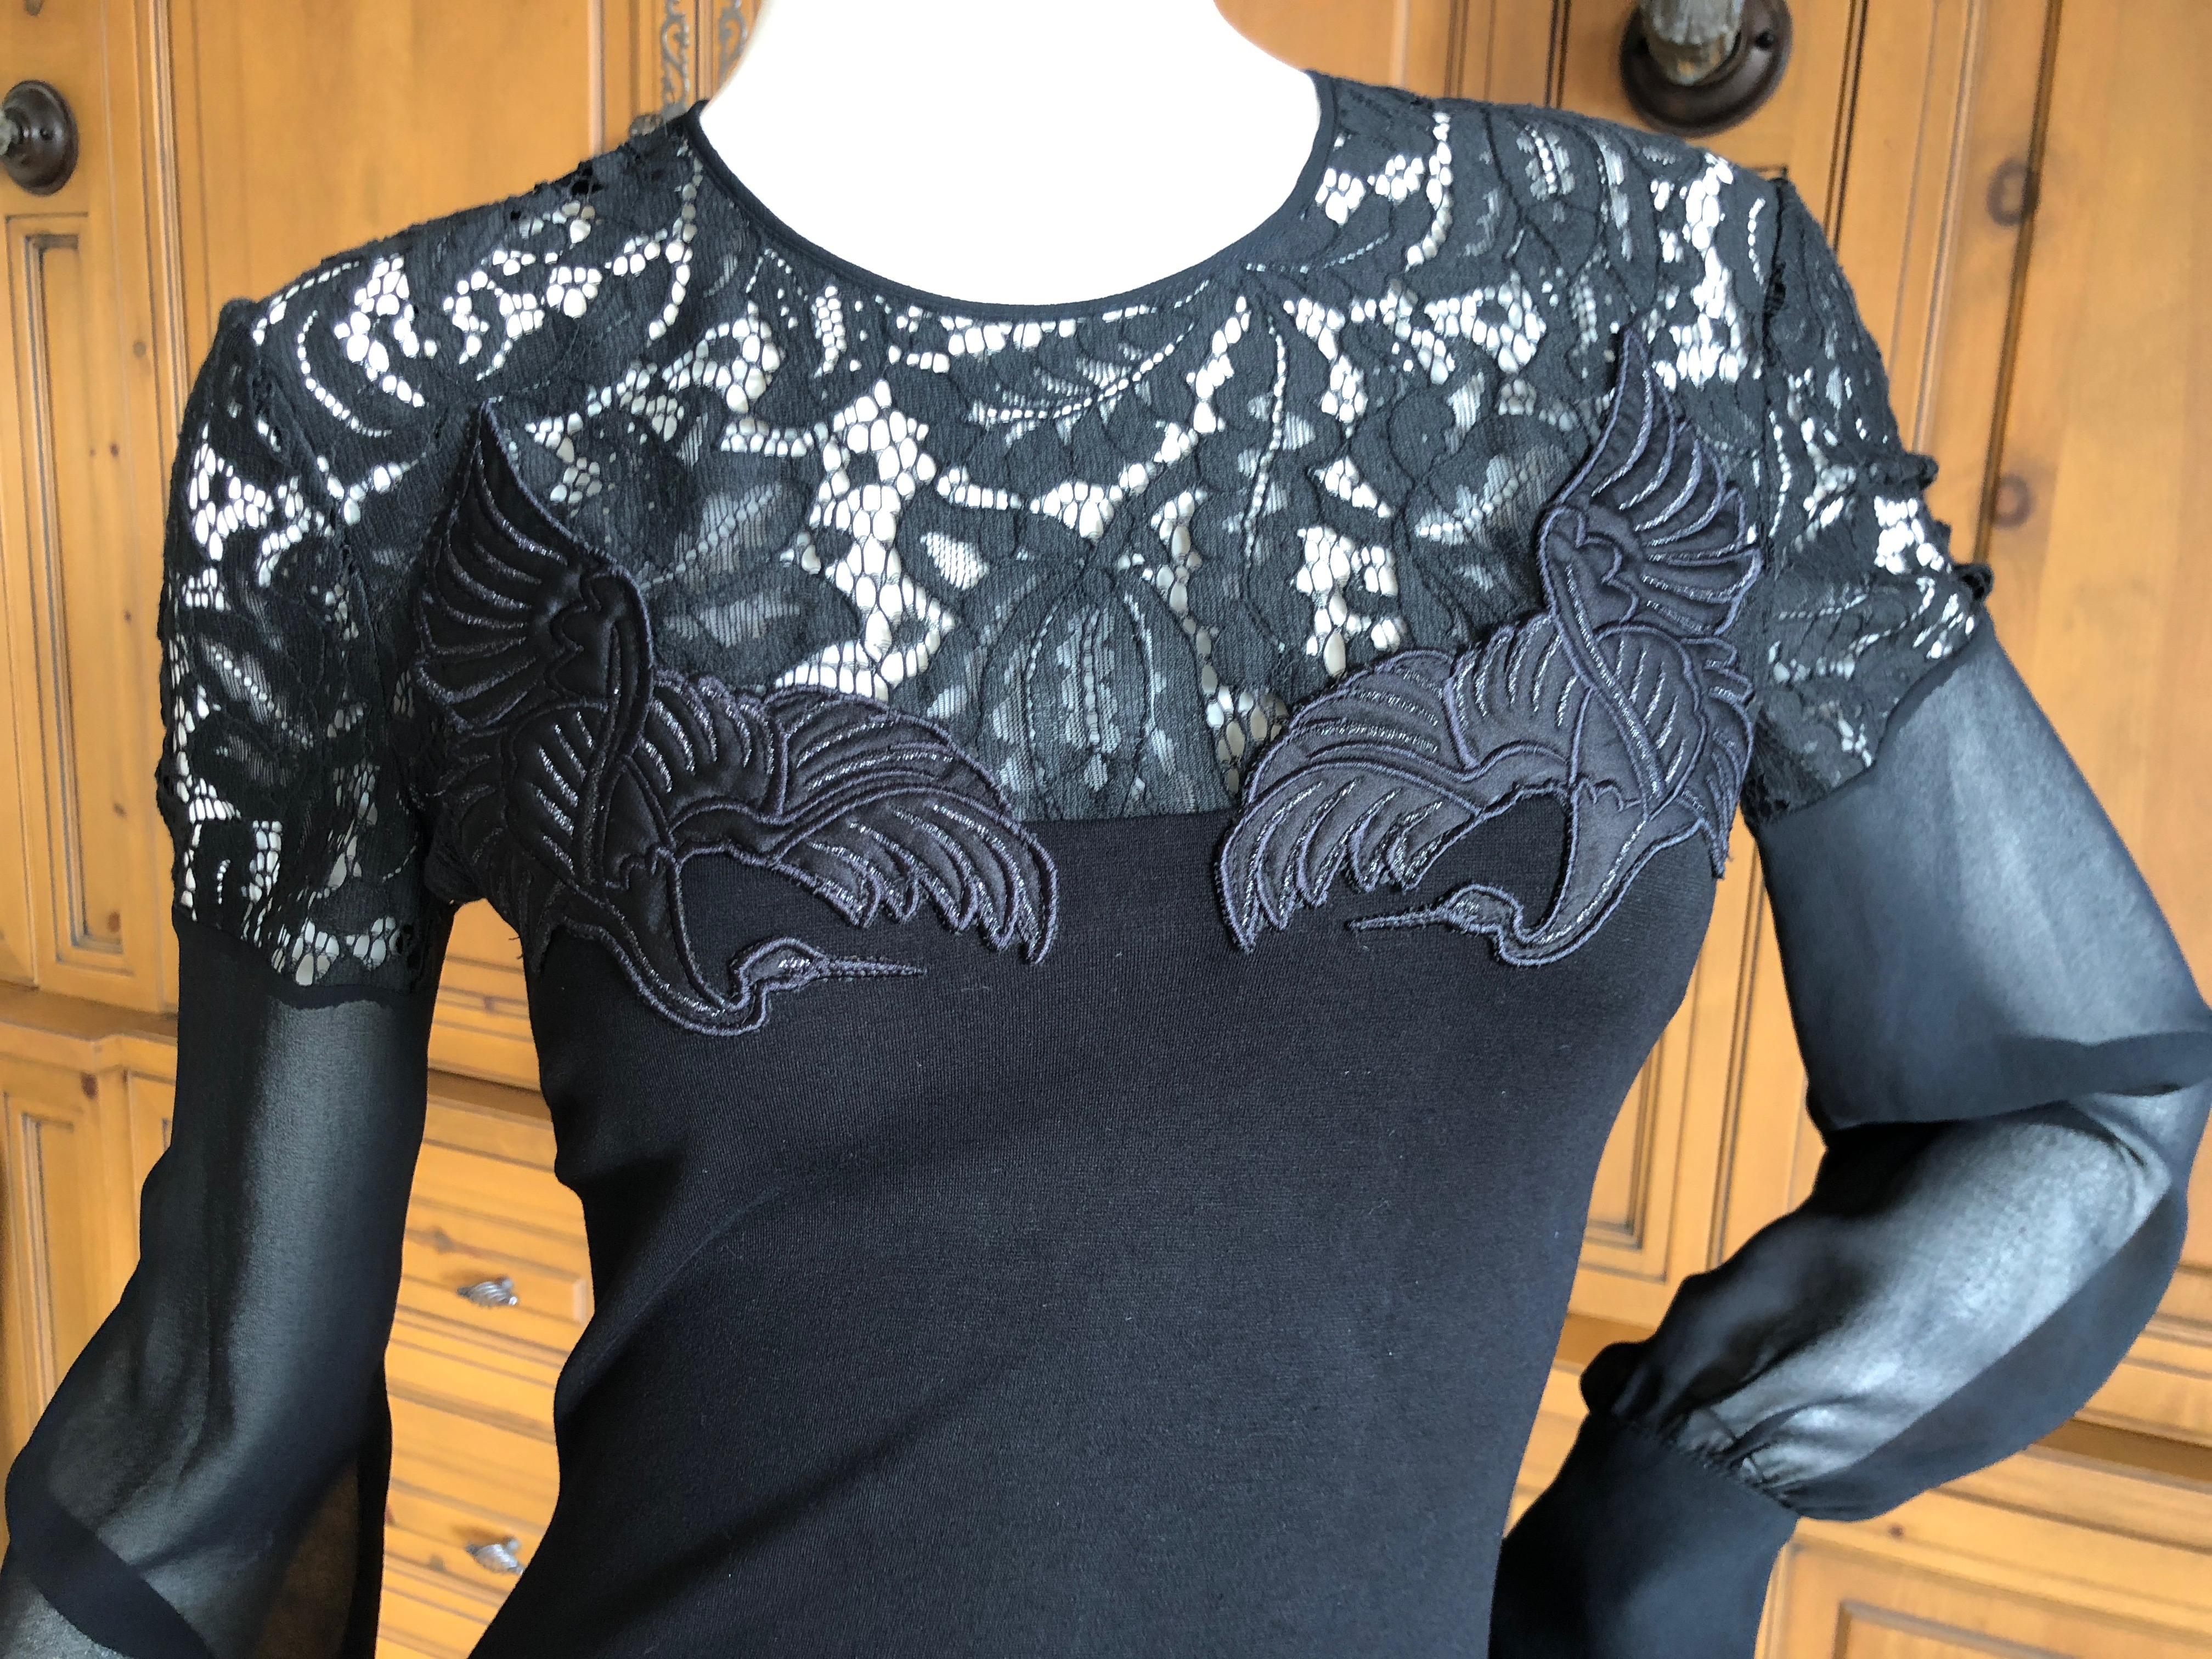 Roberto Cavalli Just Cavalli Vintage Black stretch Dress with Embroidered Cranes
Size 38
Bust  34